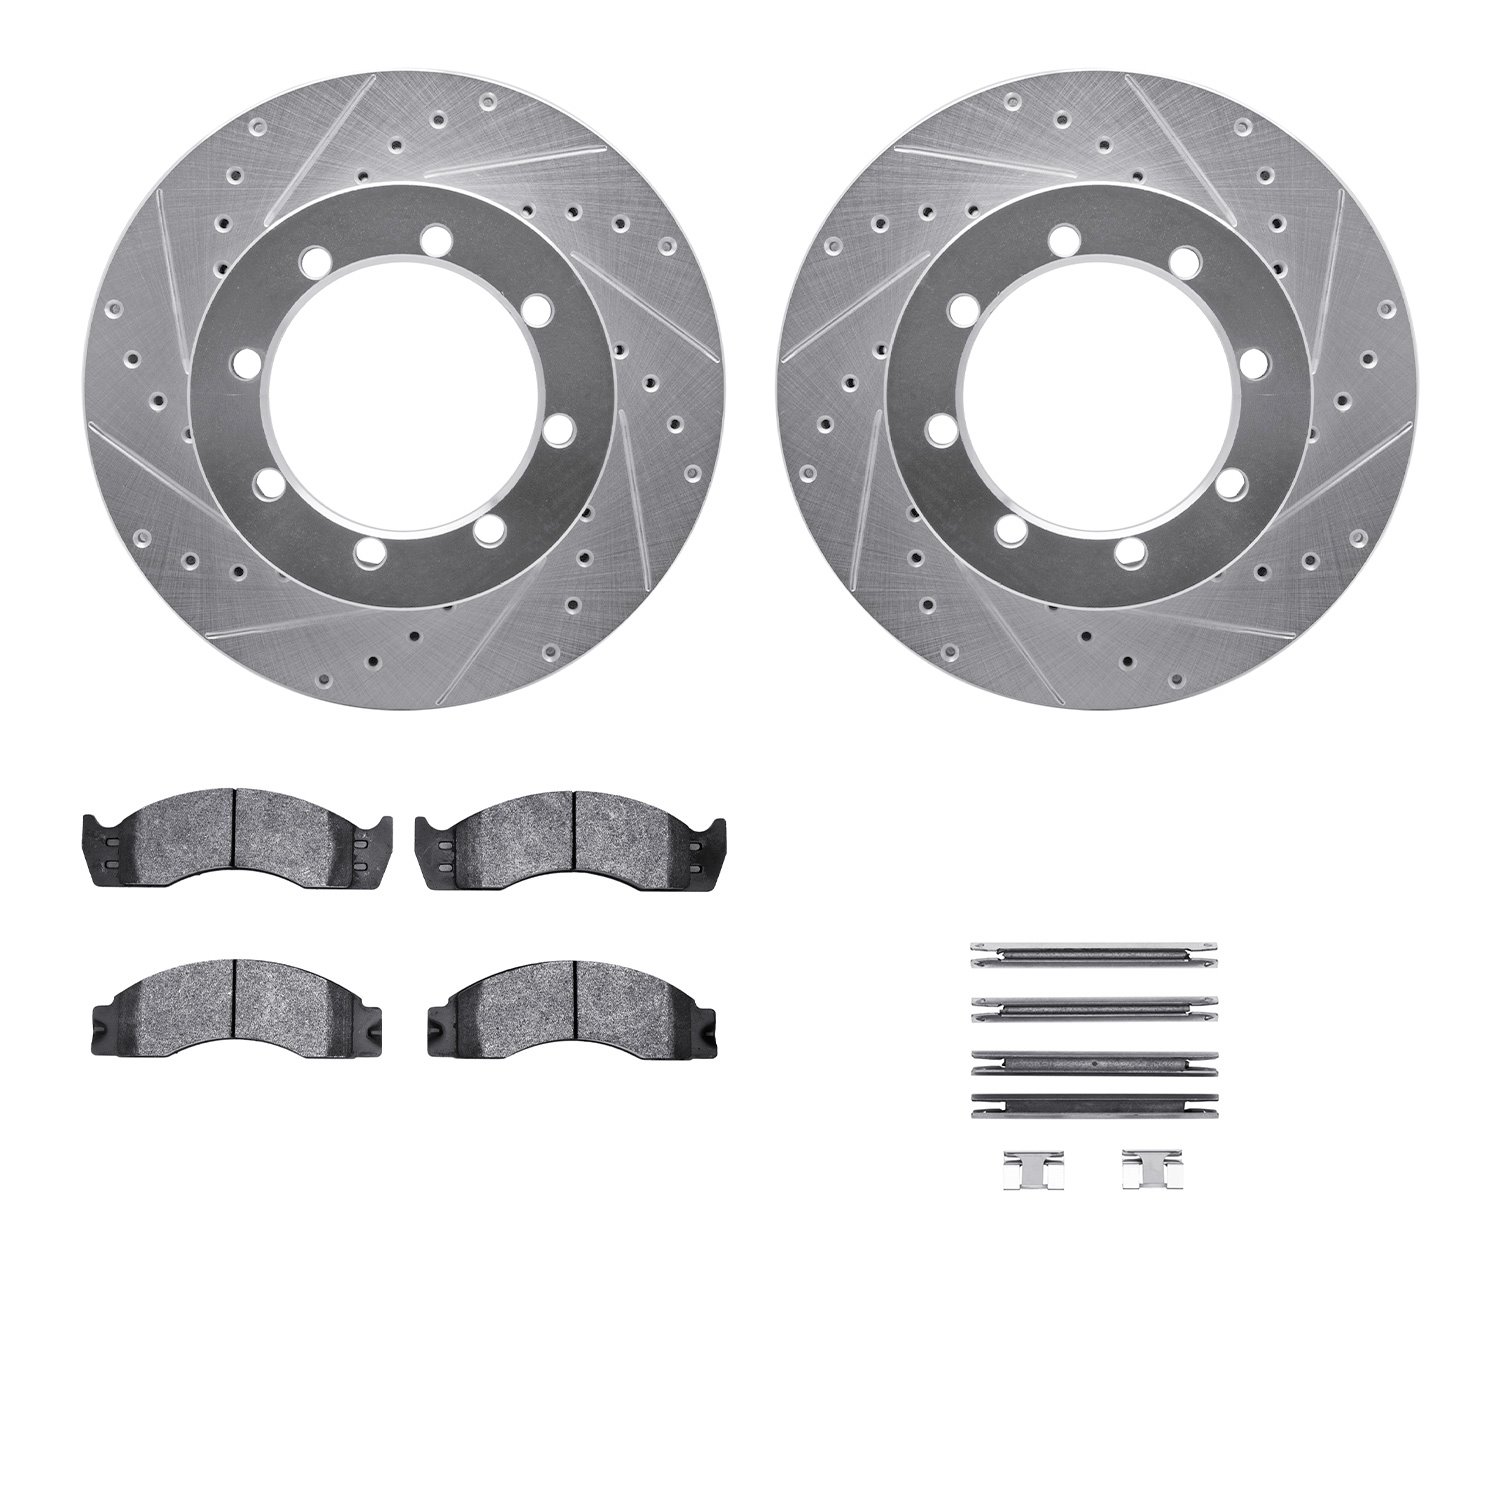 7412-54040 Drilled/Slotted Brake Rotors with Ultimate-Duty Brake Pads Kit & Hardware [Silver], 2003-2007 Ford/Lincoln/Mercury/Ma